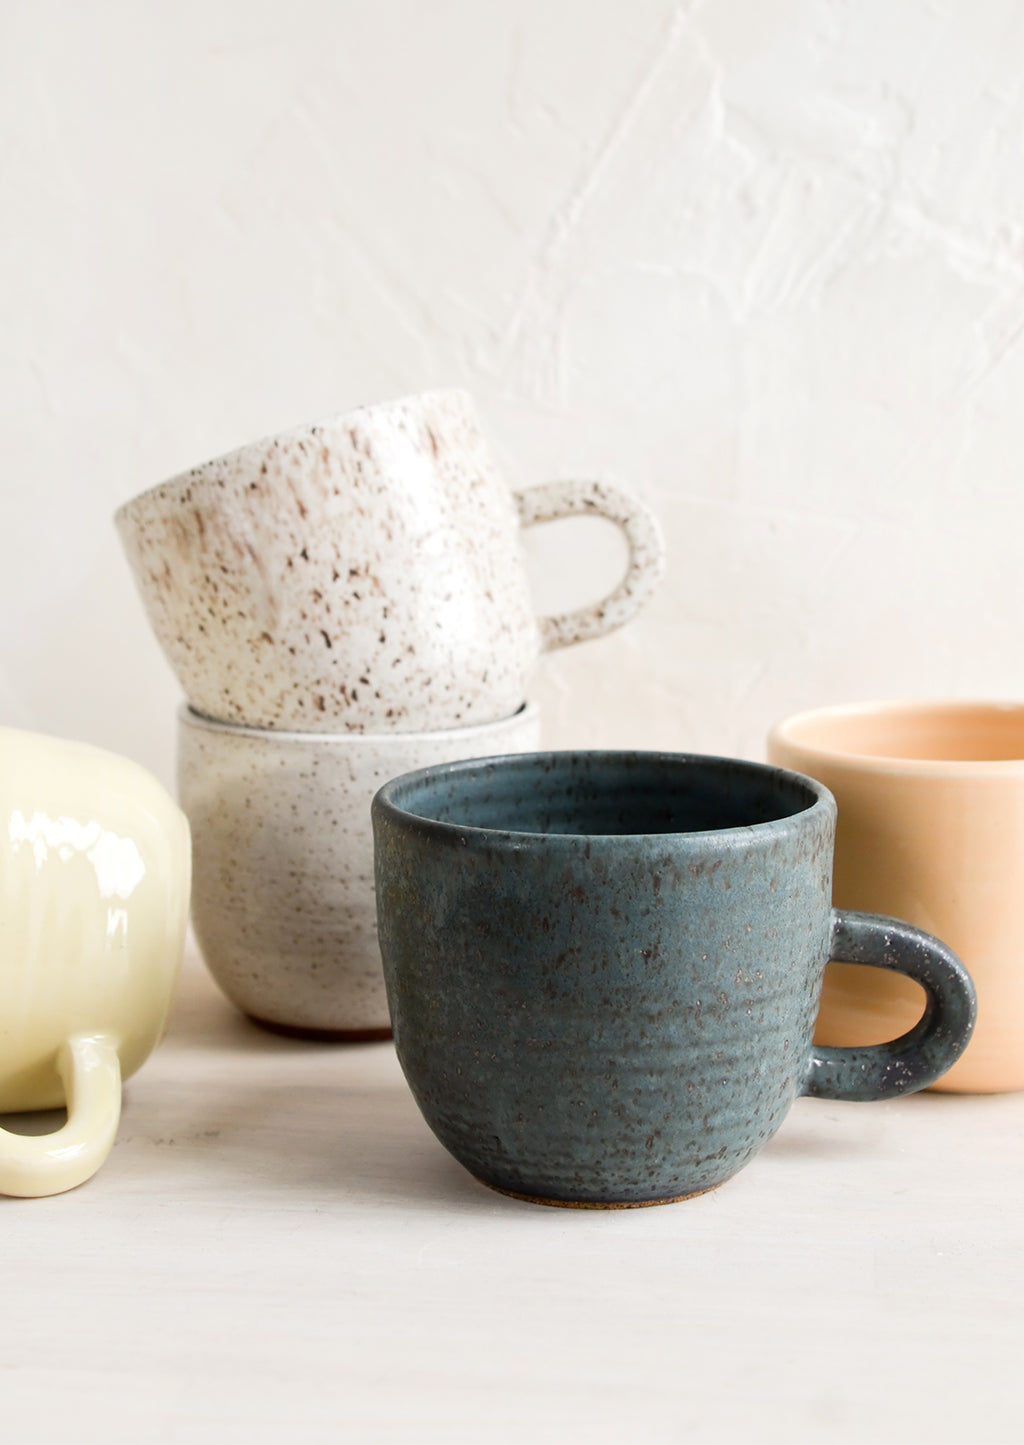 3: A stack of ceramic mugs in a mix of glazes and colors.